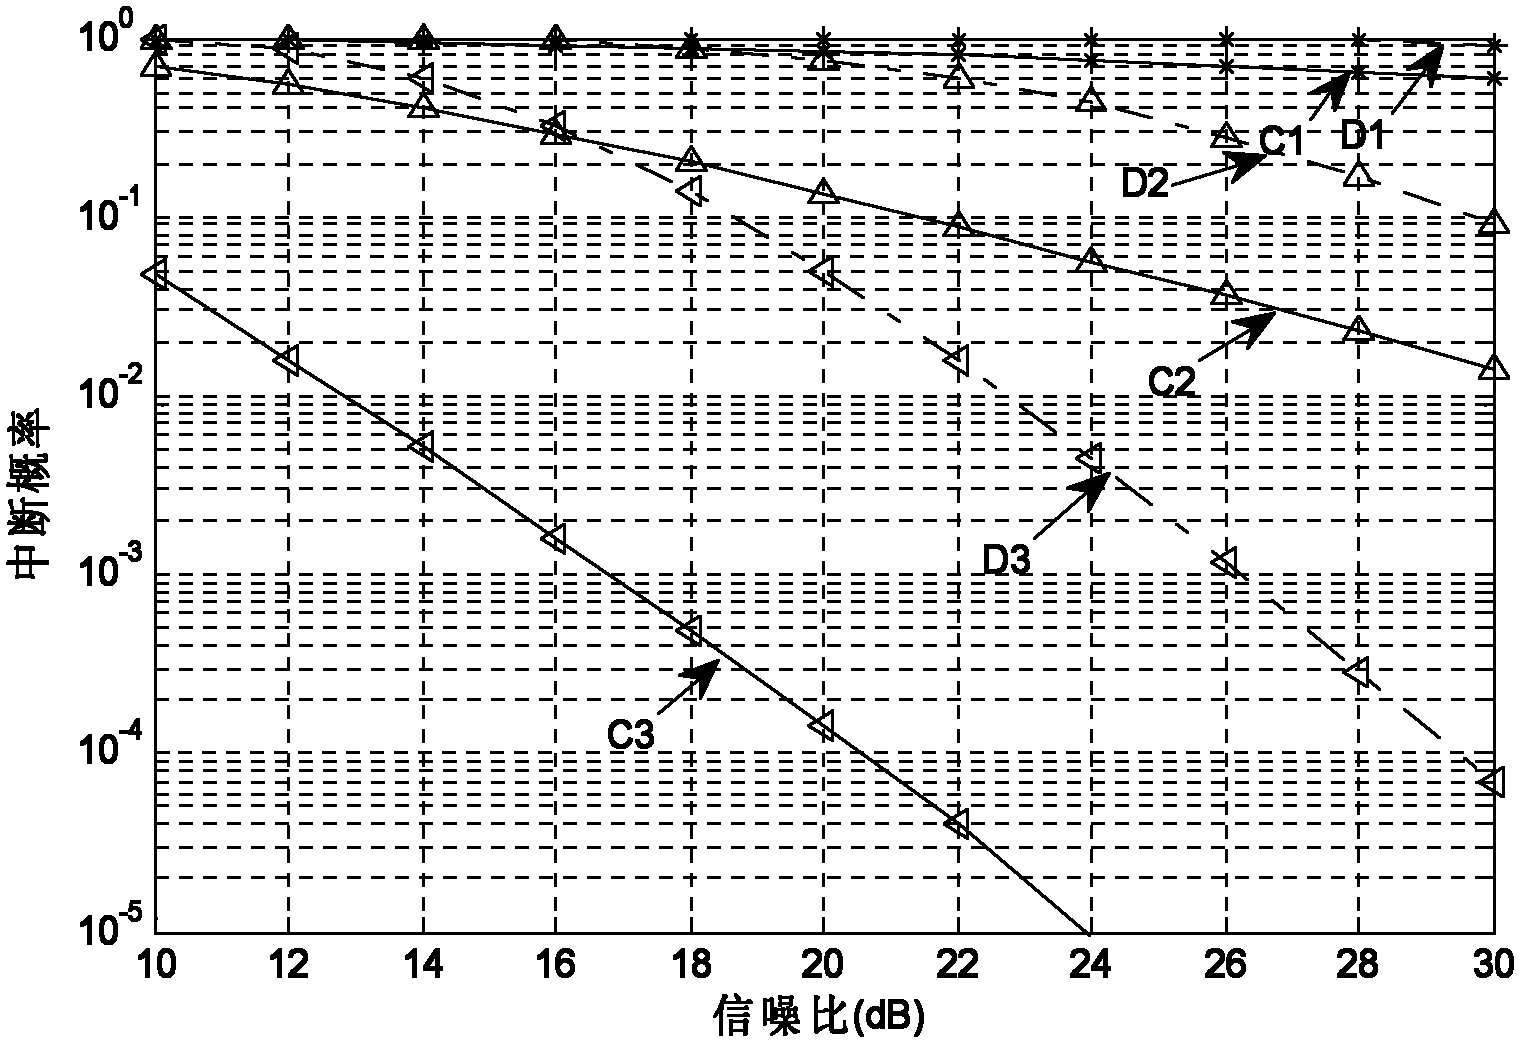 Physical layer network coding method for bidirectional relay channel of cellular system